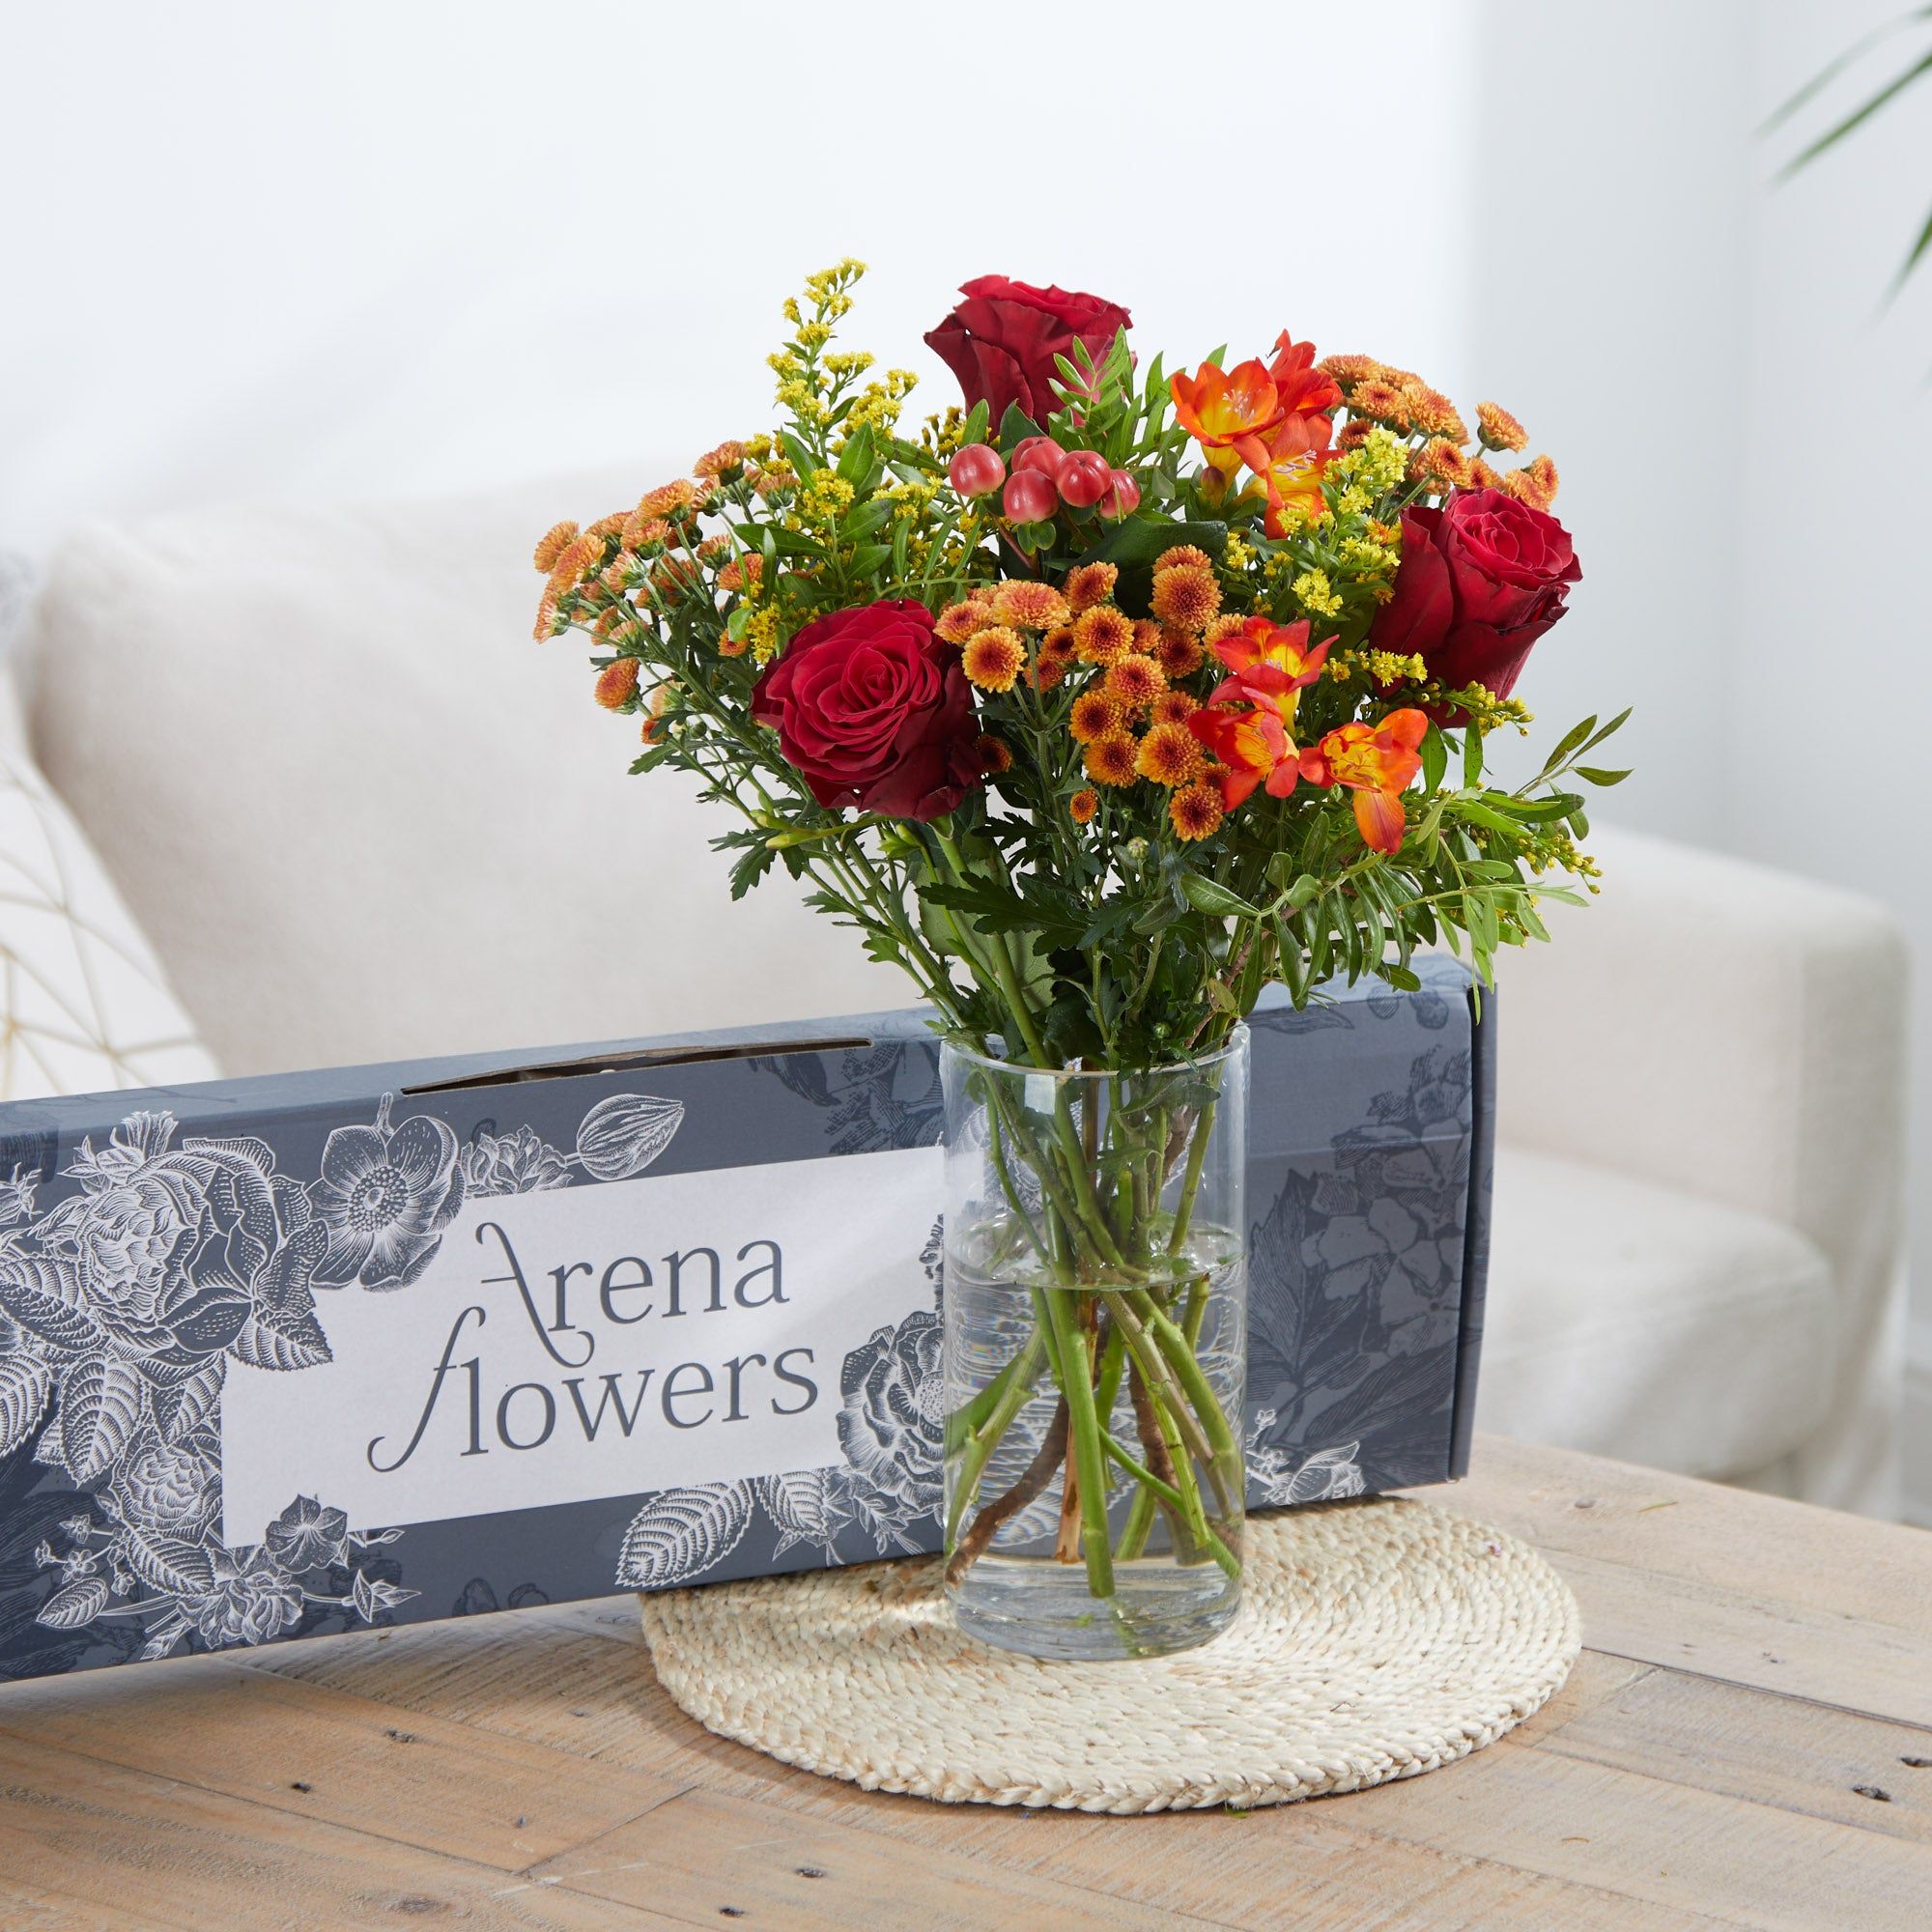 Send out 'Cosy Autumn' ethical letterbox flowers | Arena Flowers